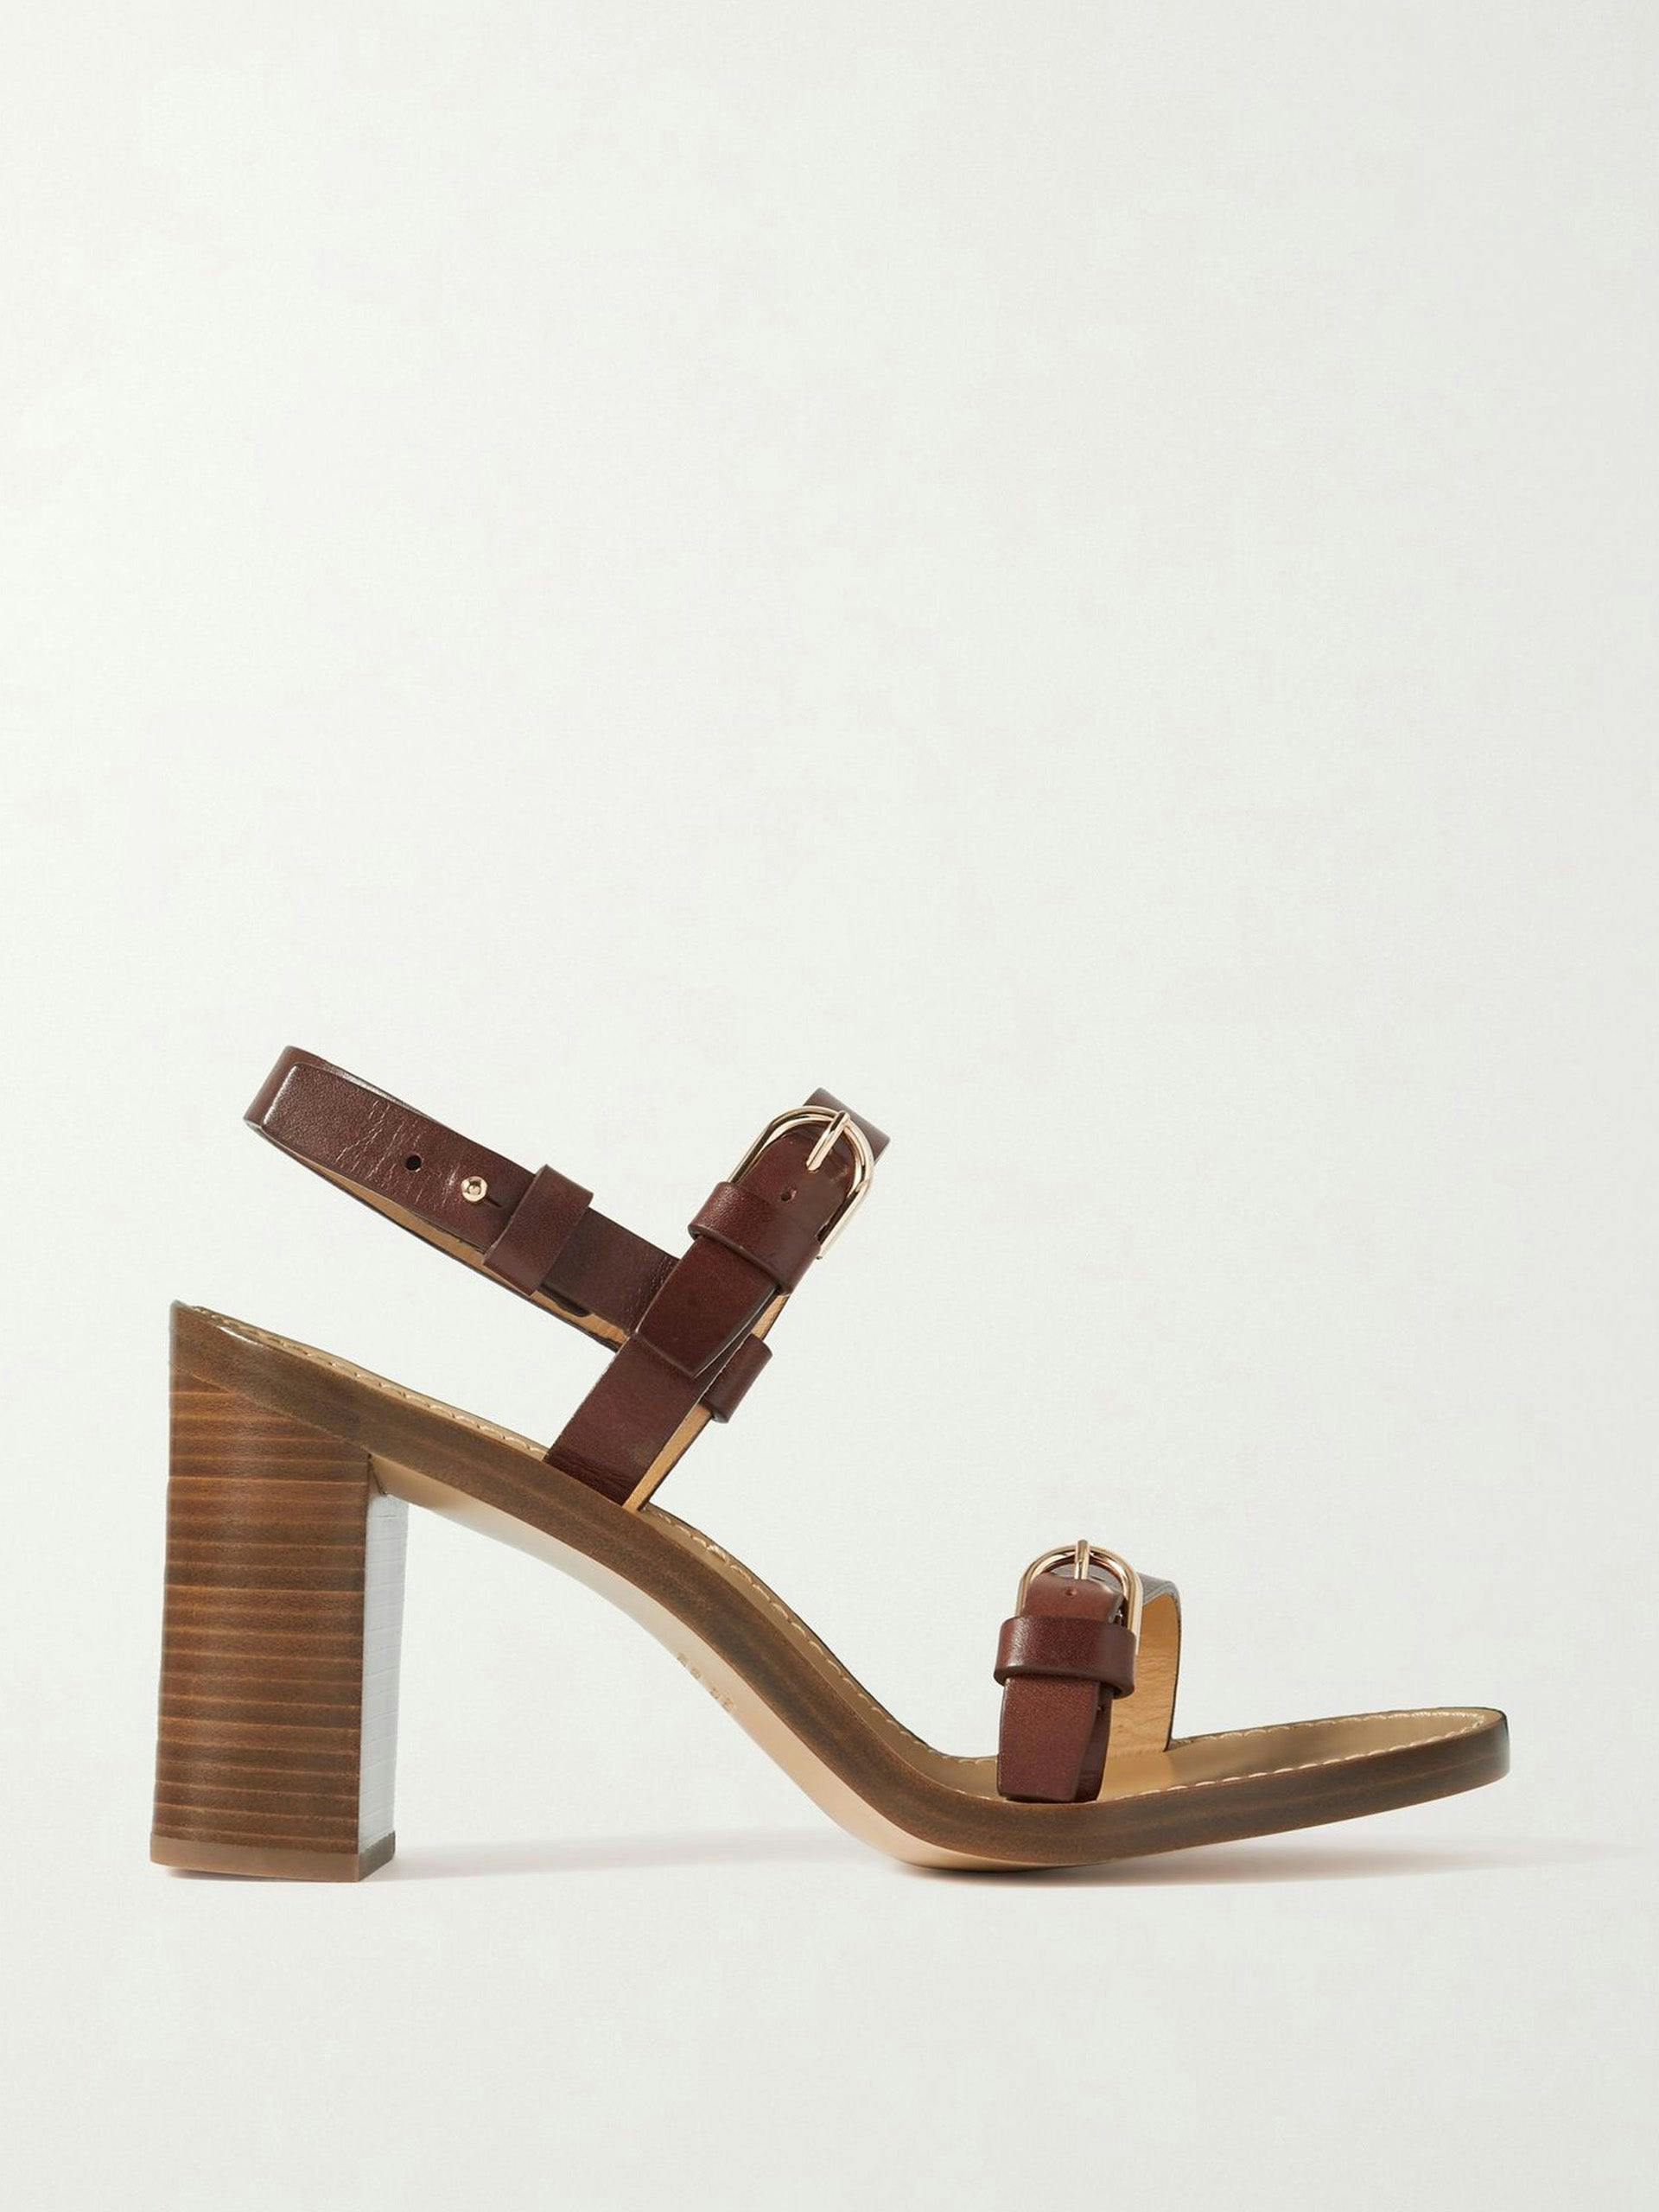 Miraya buckled leather slingback sandals in Brown